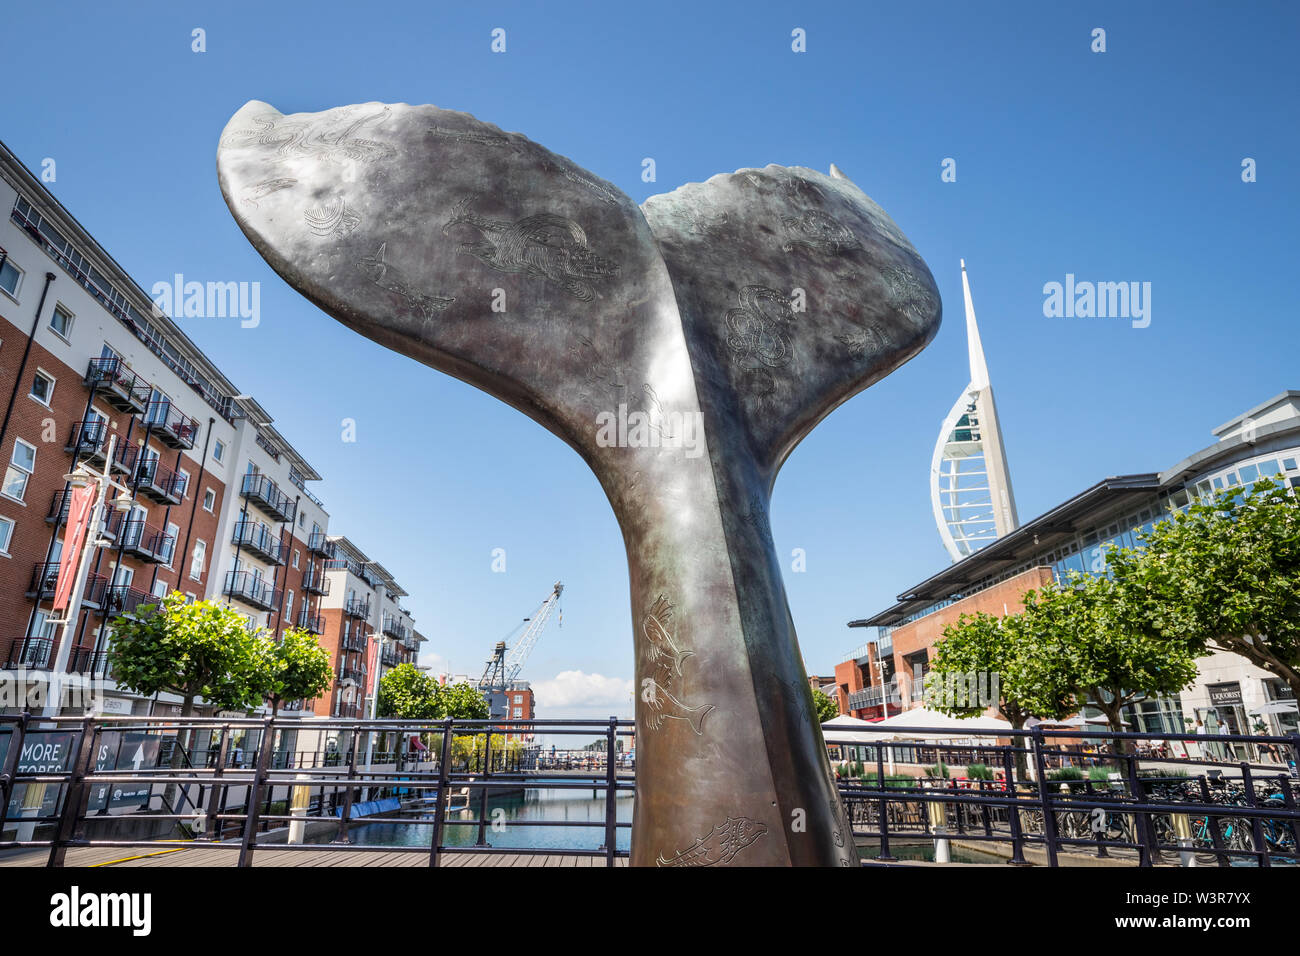 The Whale's Tail sculpture by artist Richard Farrington at Gunwharf Quays, Portsmouth, Hampshire, UK Stock Photo